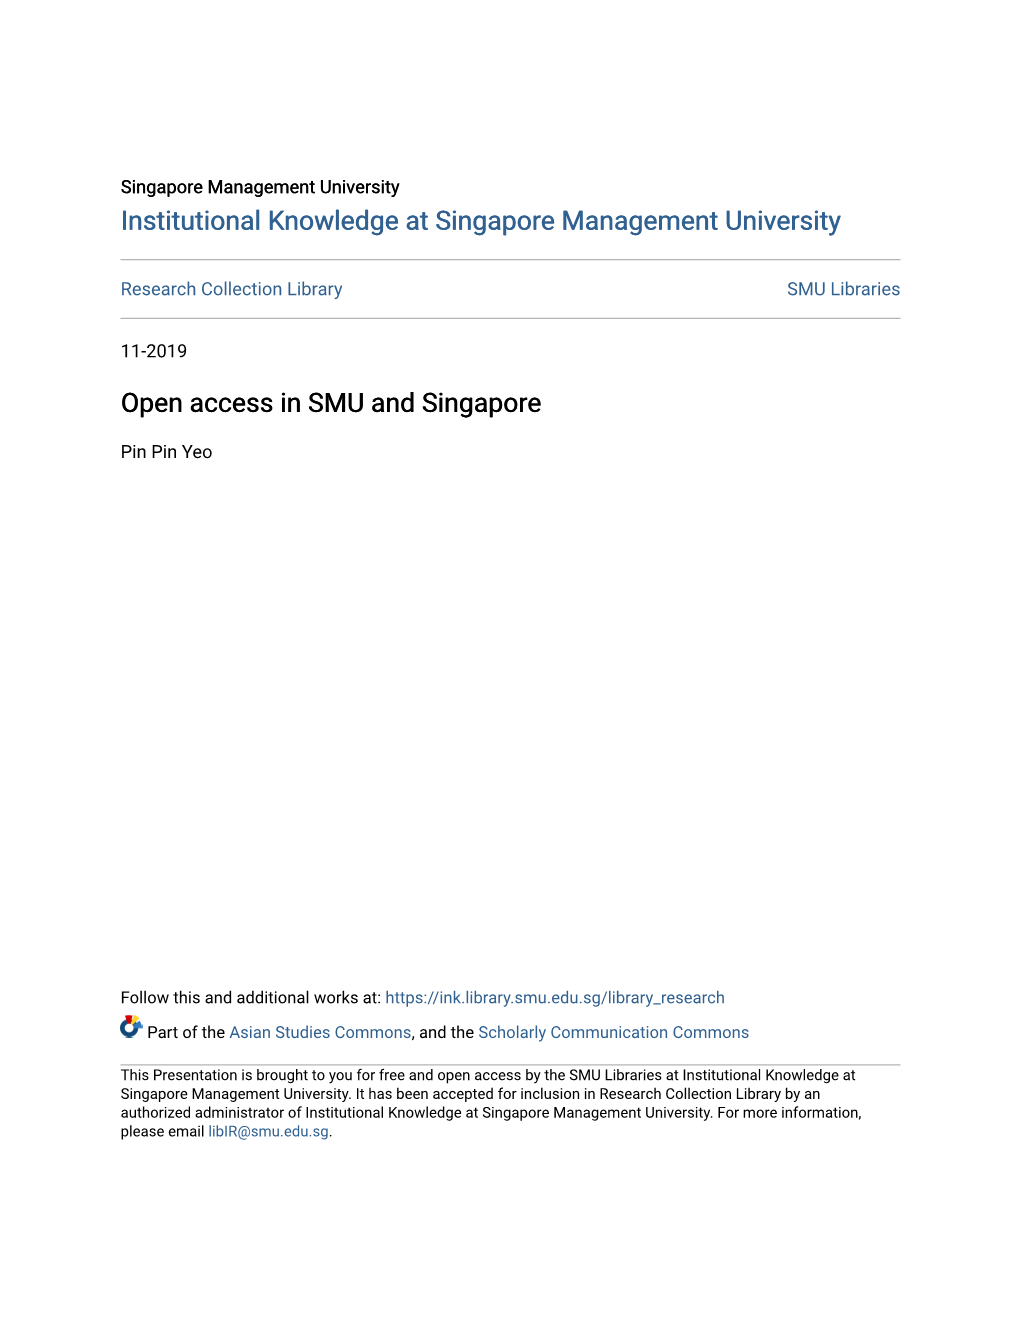 Open Access in SMU and Singapore